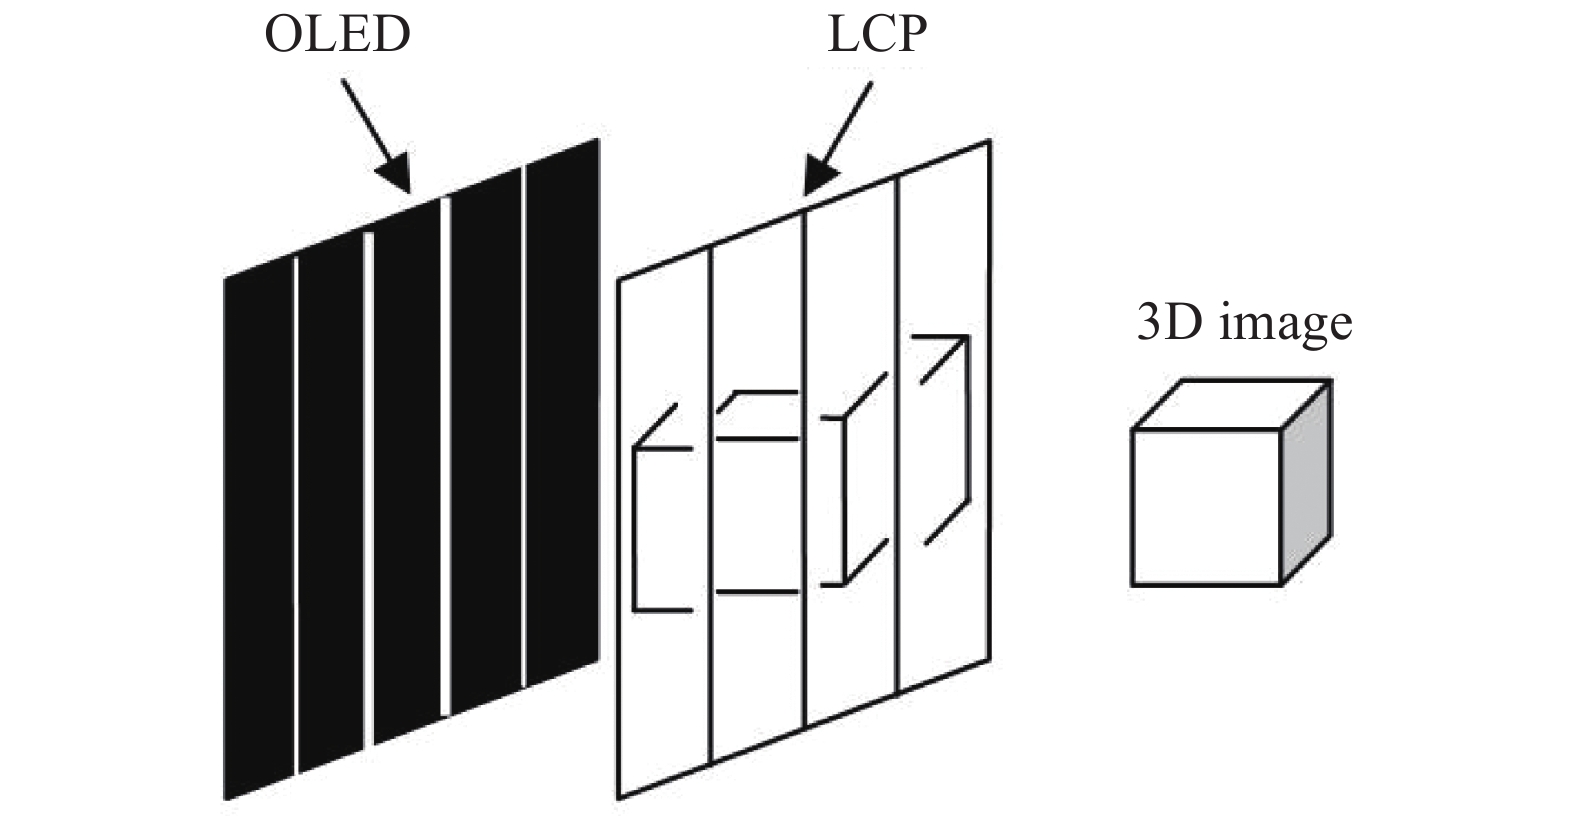 Structure diagram of the integral imaging 3D display based on a gradient line light source